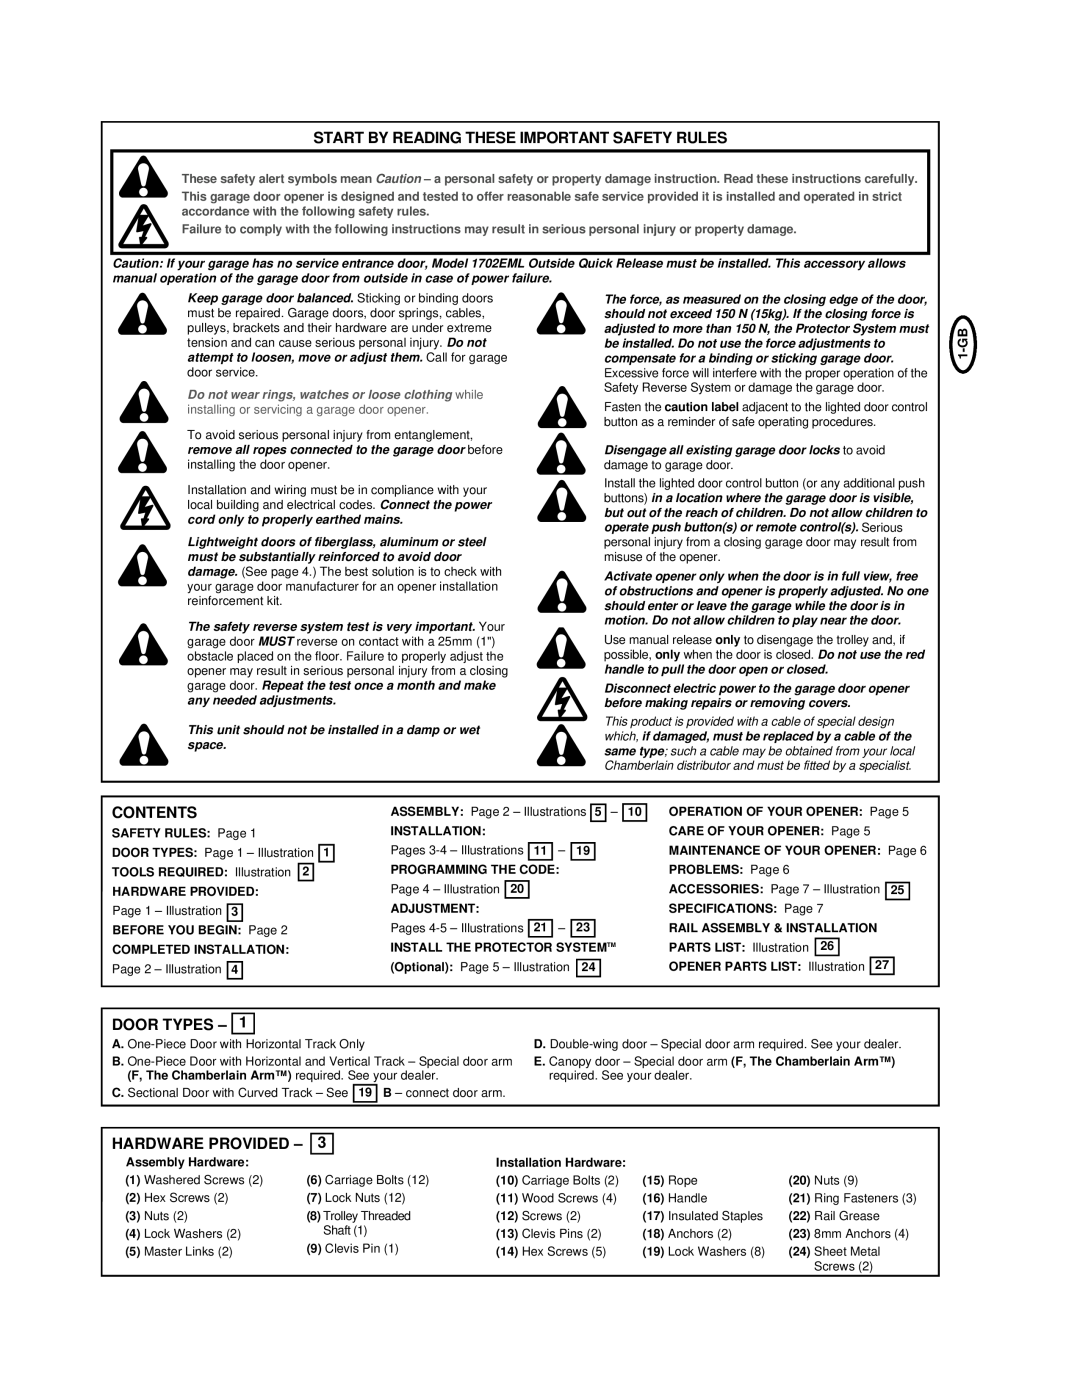 Chamberlain 2000UK manual Start By Reading These Important Safety Rules, Contents, Door Types, Hardware Provided, 1-GB 